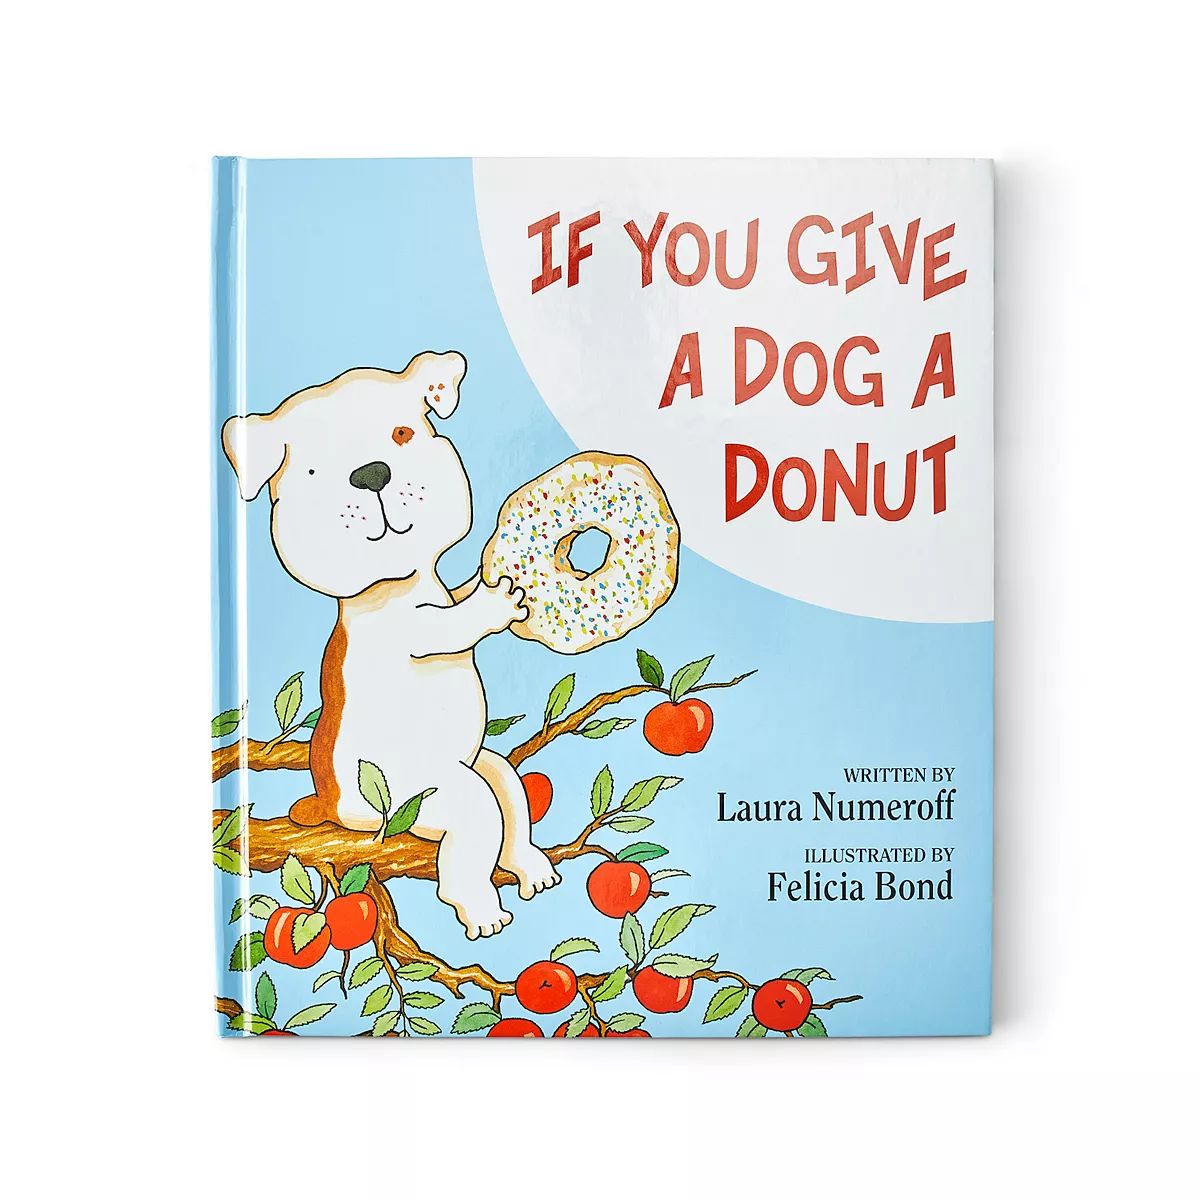 Kohl's Cares Give A Dog A Donut by Laura Numeroff Hardcover Children's Book | Kohl's